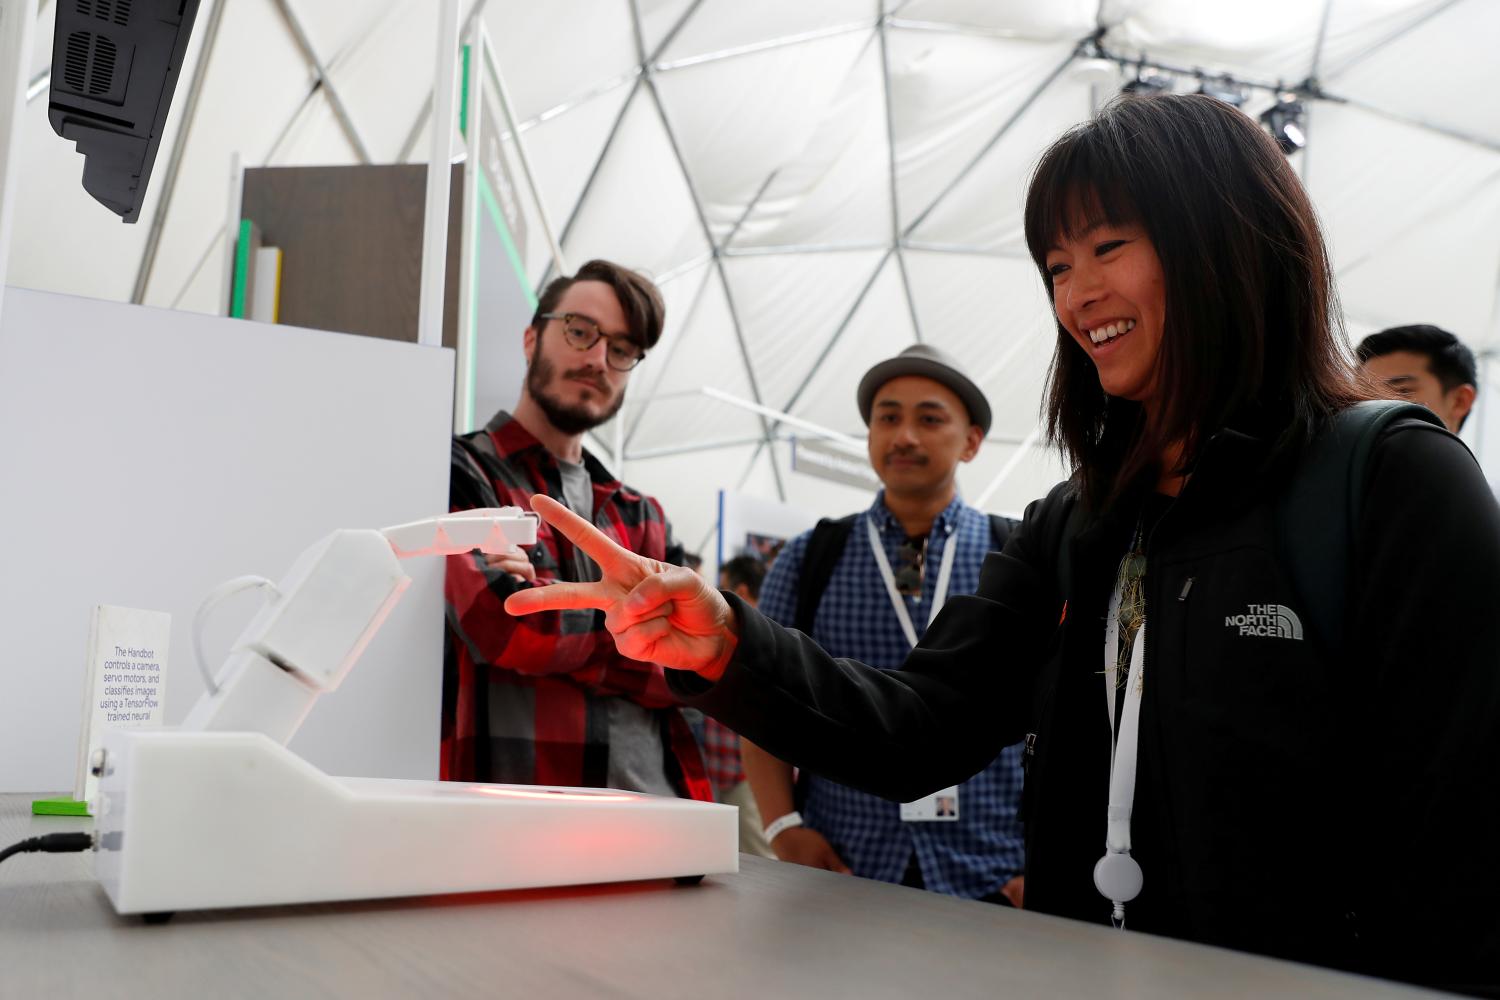 An attendee competes in a game of rock, paper, scissors against a Handbot robot during the annual Google I/O developers conference in Mountain View, California, May 8, 2018. REUTERS/ Stephen Lam     TPX IMAGES OF THE DAY - RC19D7DE6040